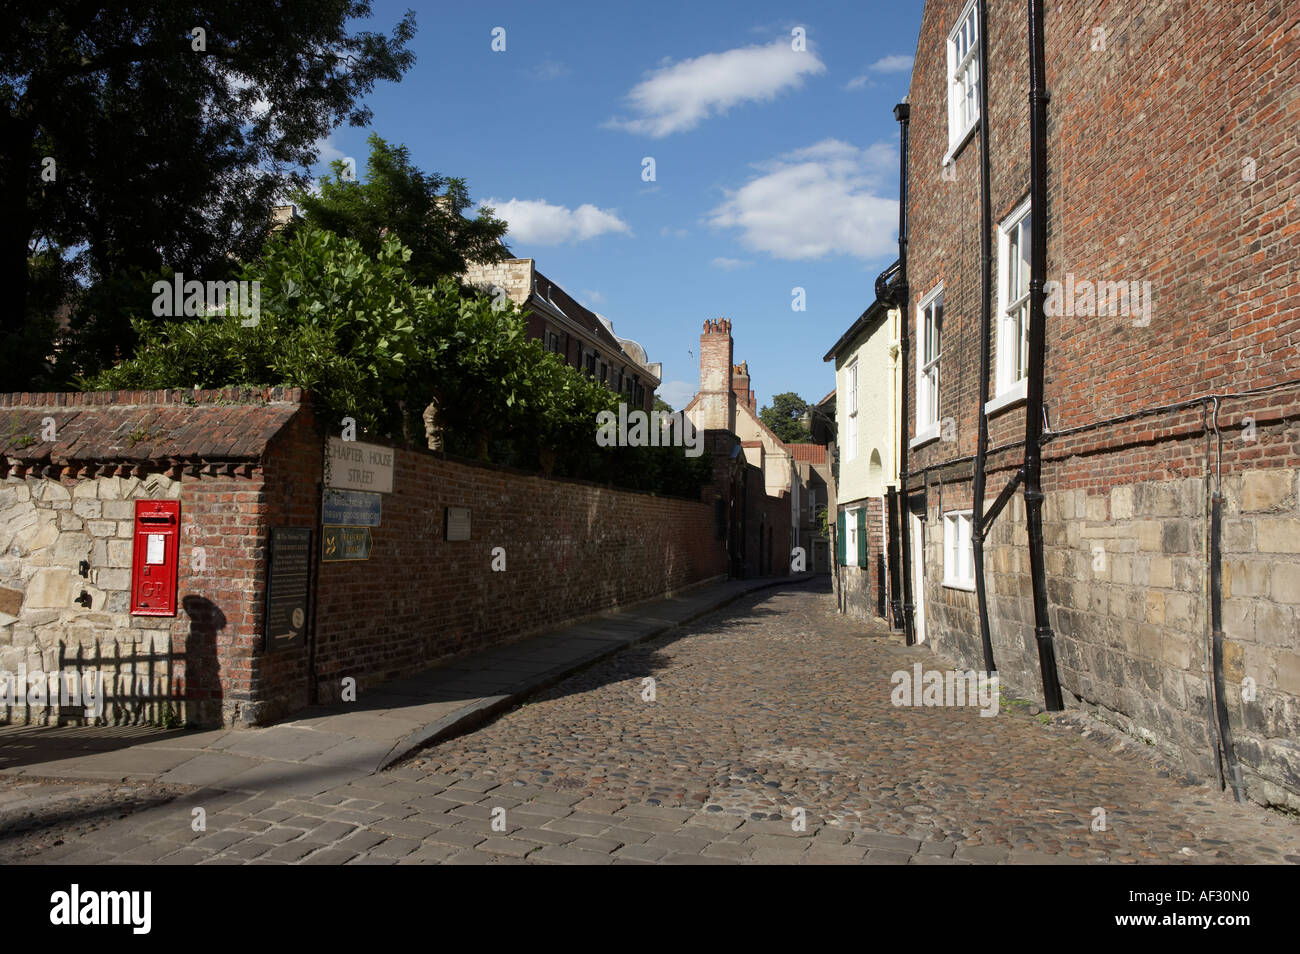 CHAPTER HOUSE STREET LEADING TO THE TREASURERS HOUSE YORK ENGLAND Stock Photo